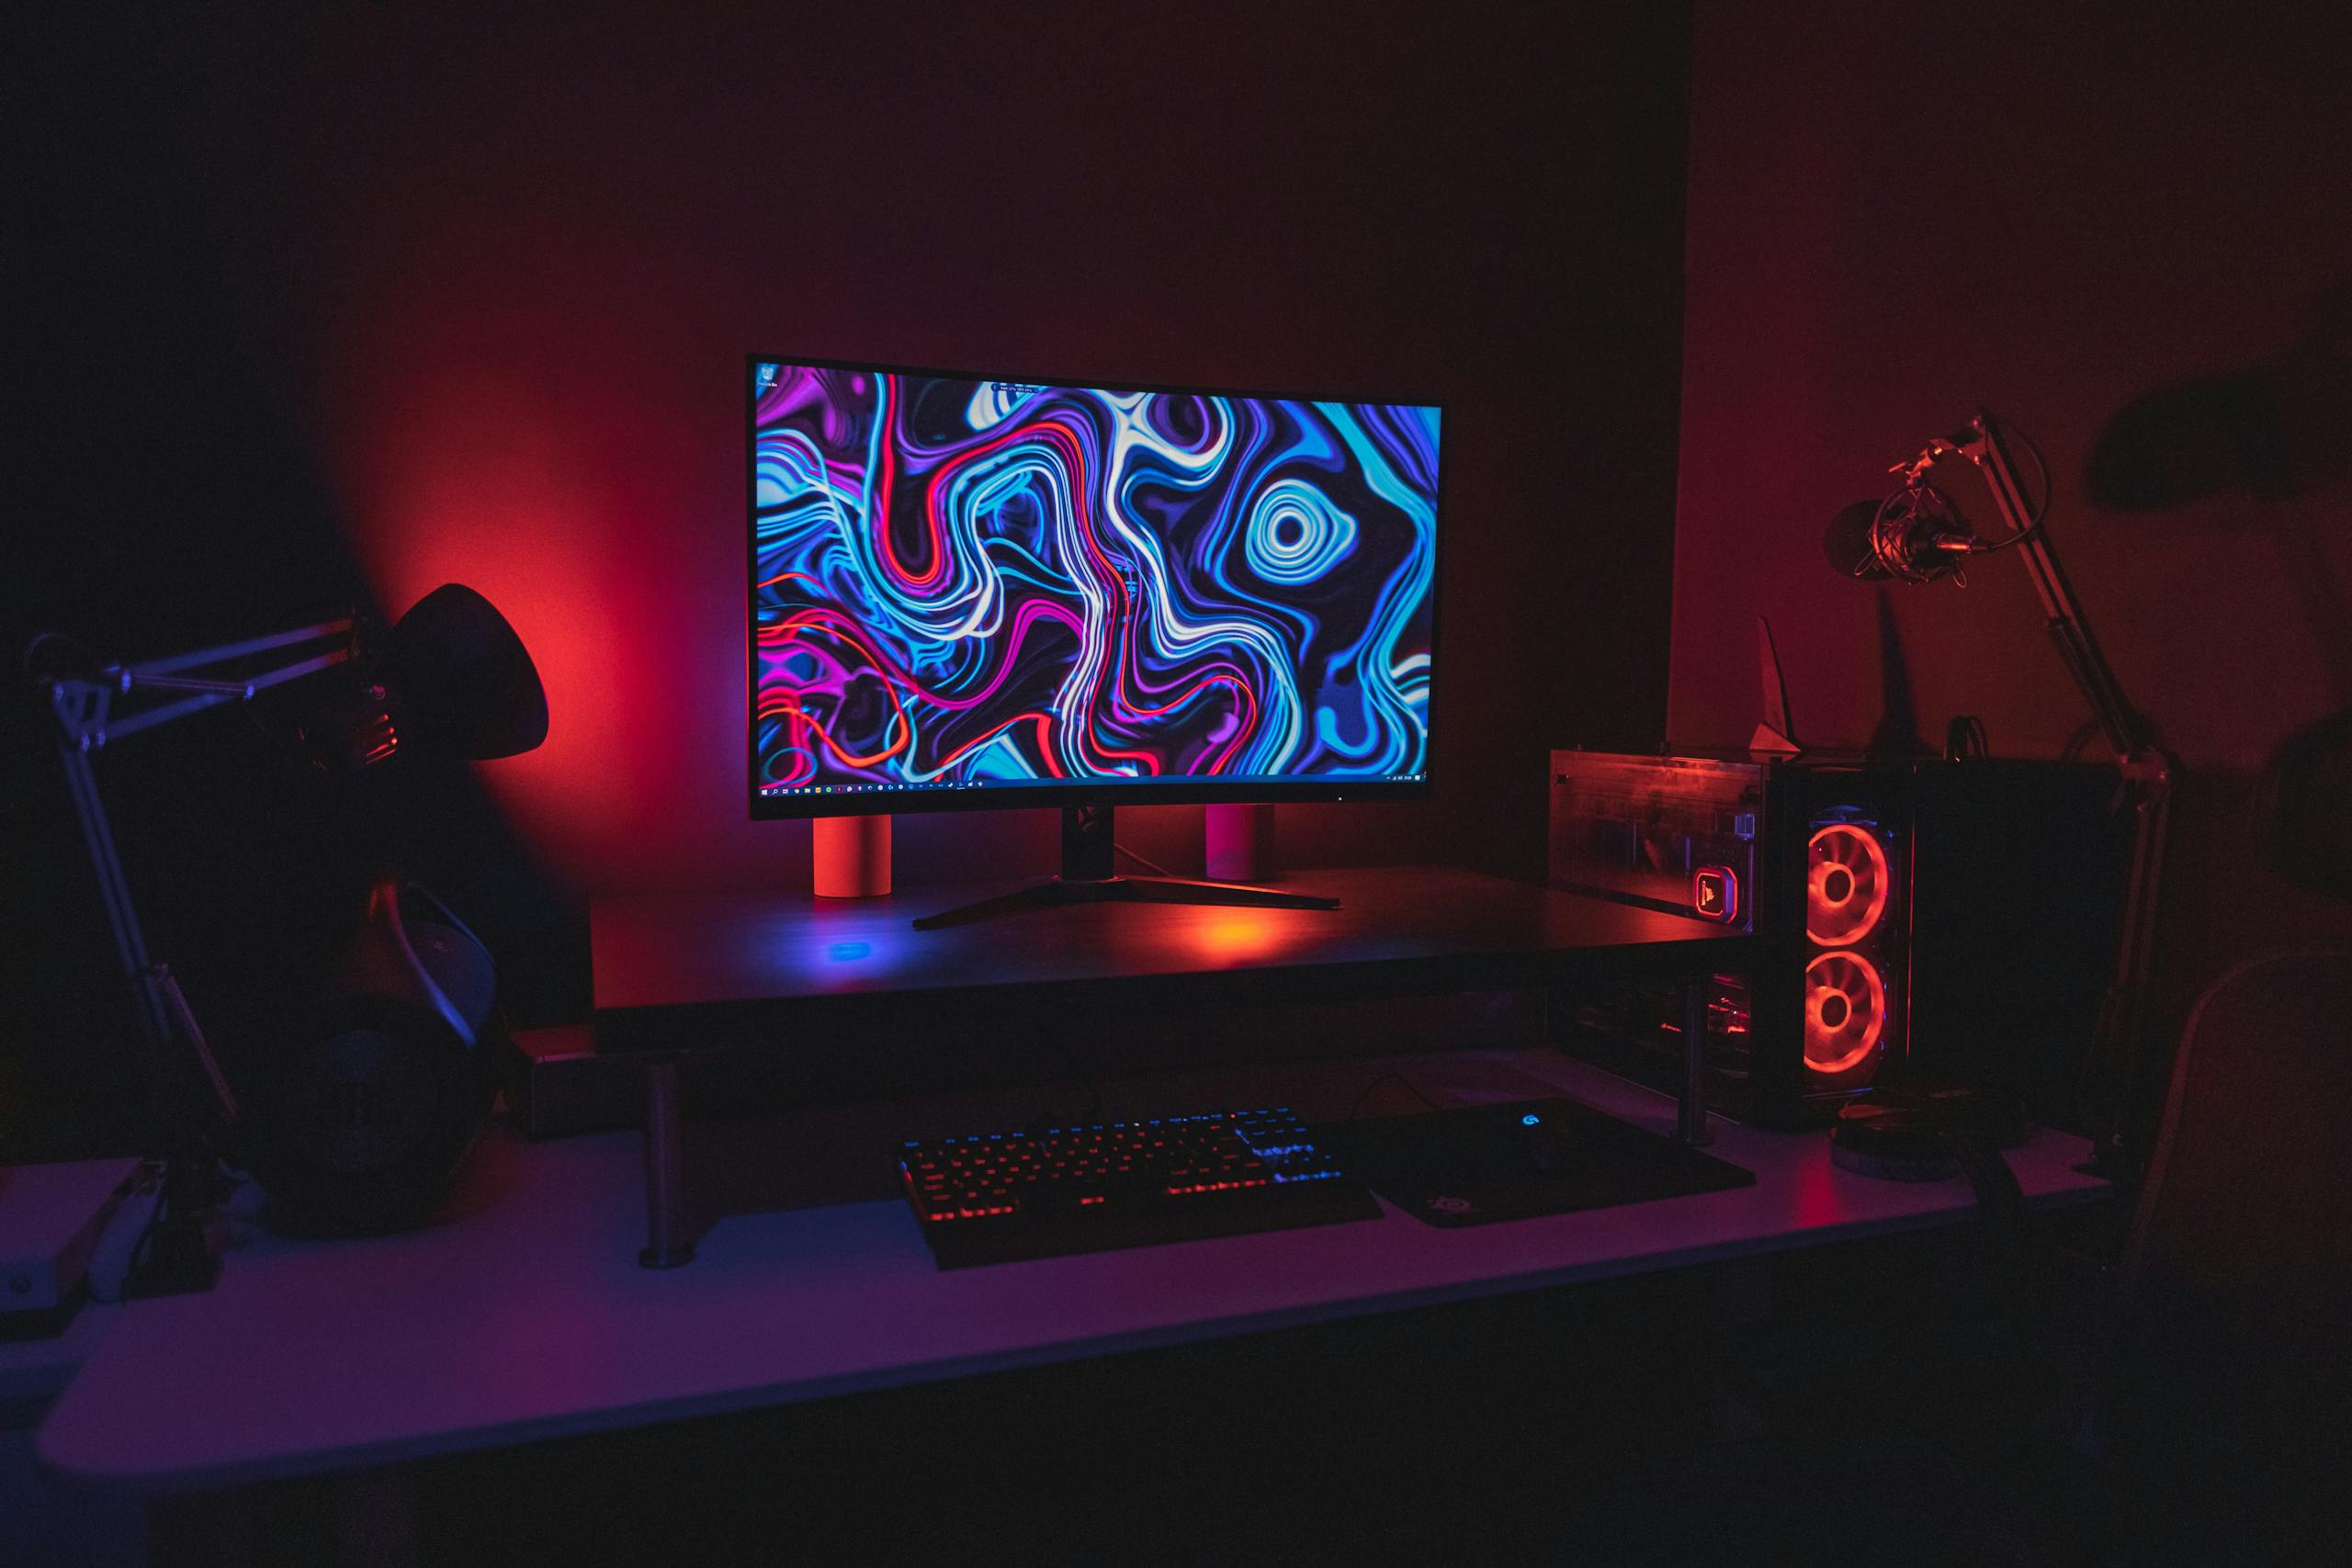 Desktop computer with a blue and orange background